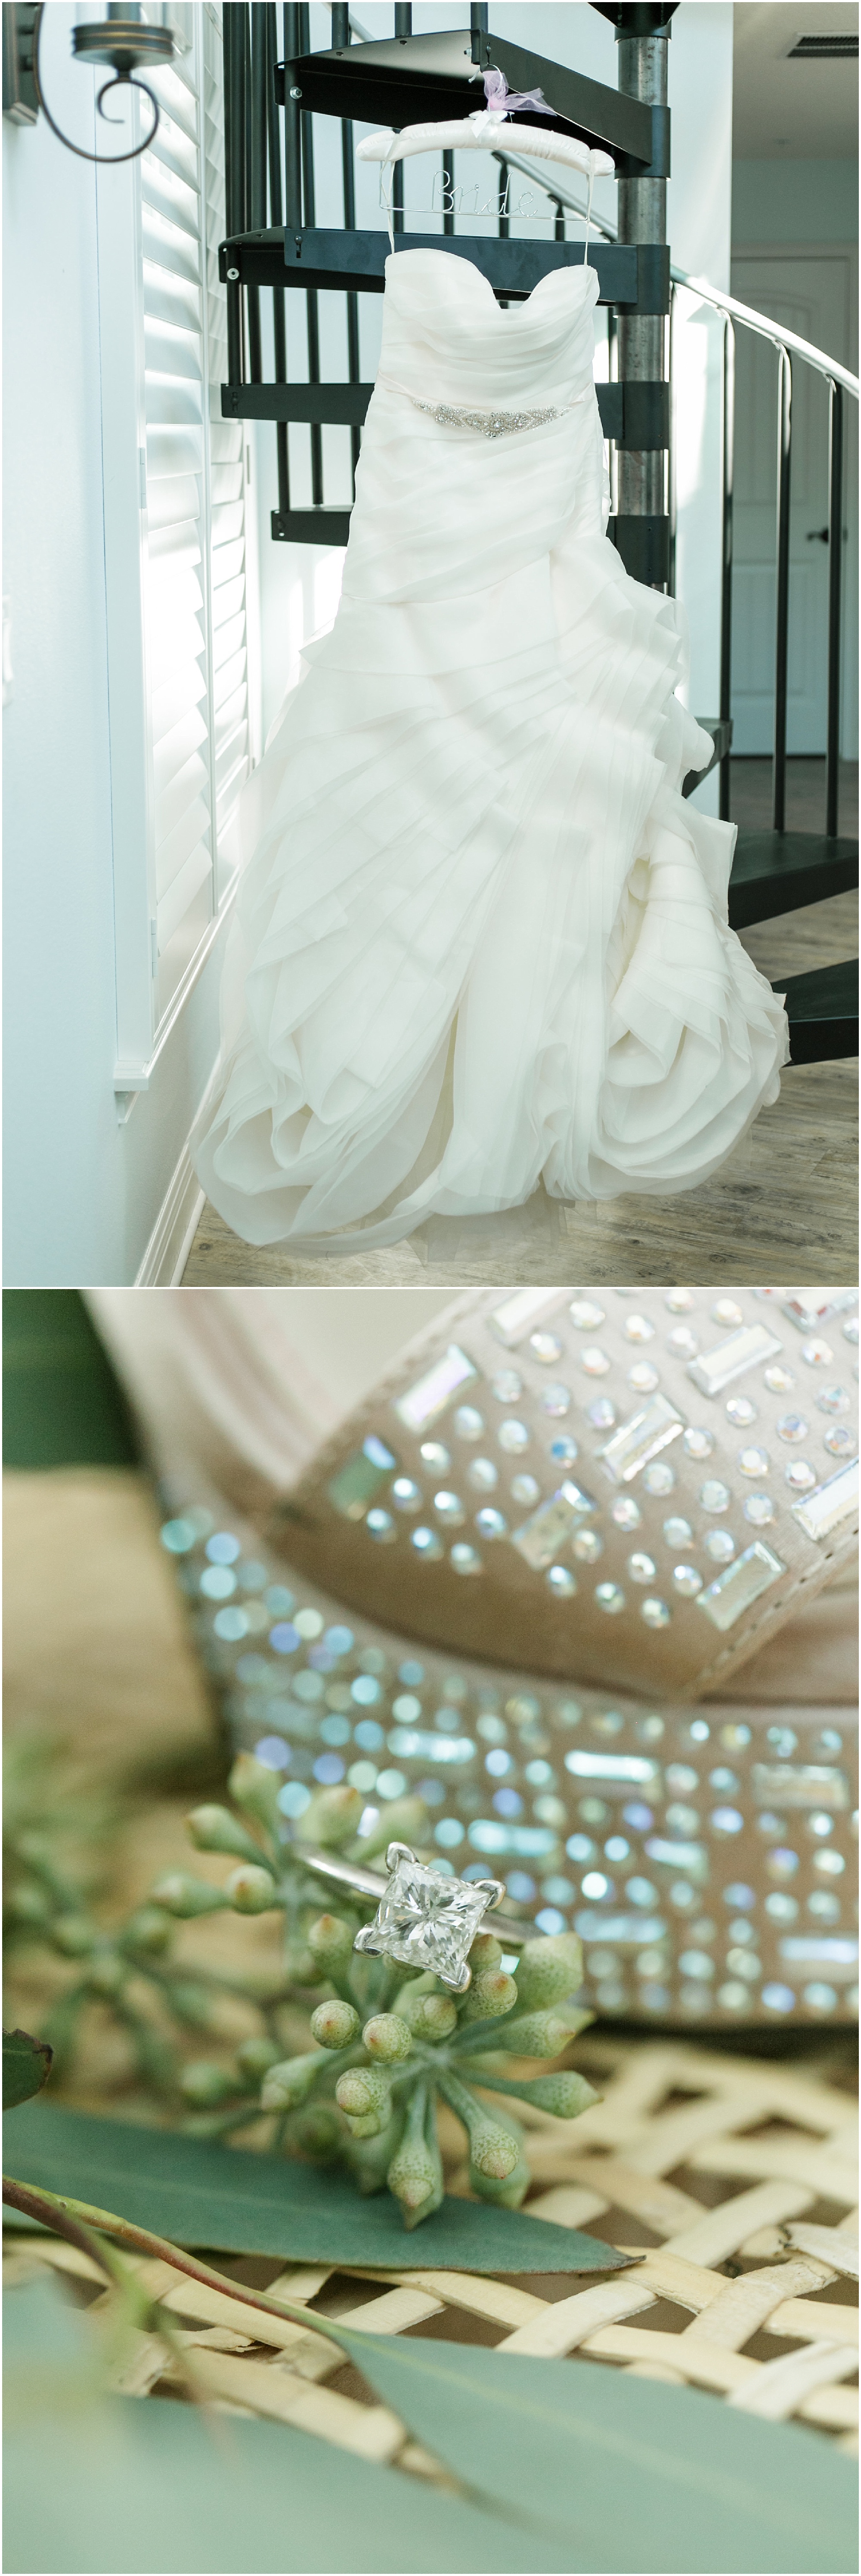 Wedding dress hanging from a spiral staircase and a close up of the brides wedding ring. 